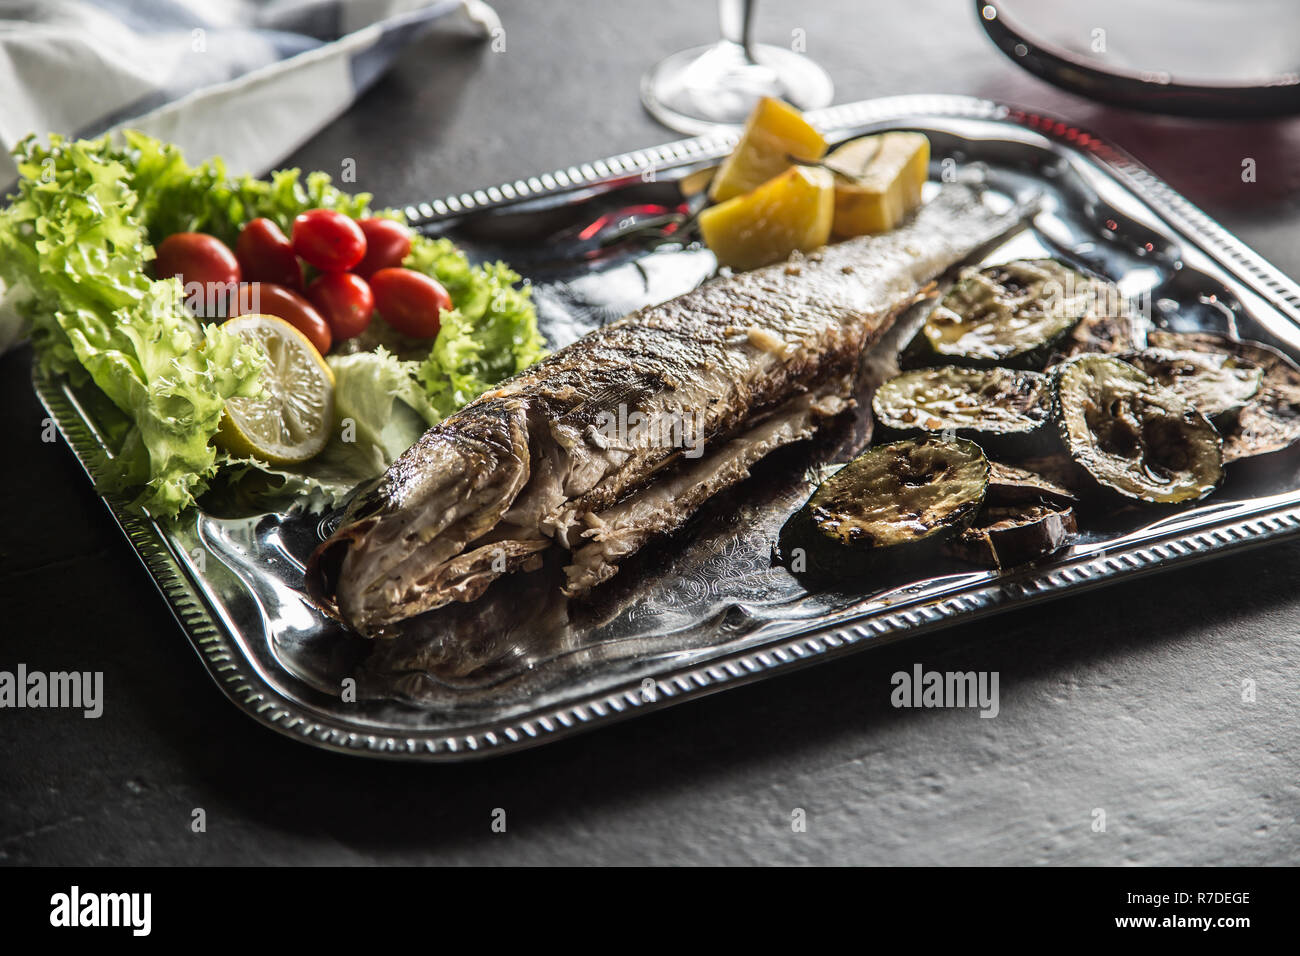 Roasted fish on dish with fresh and grilled vegetable. Stock Photo